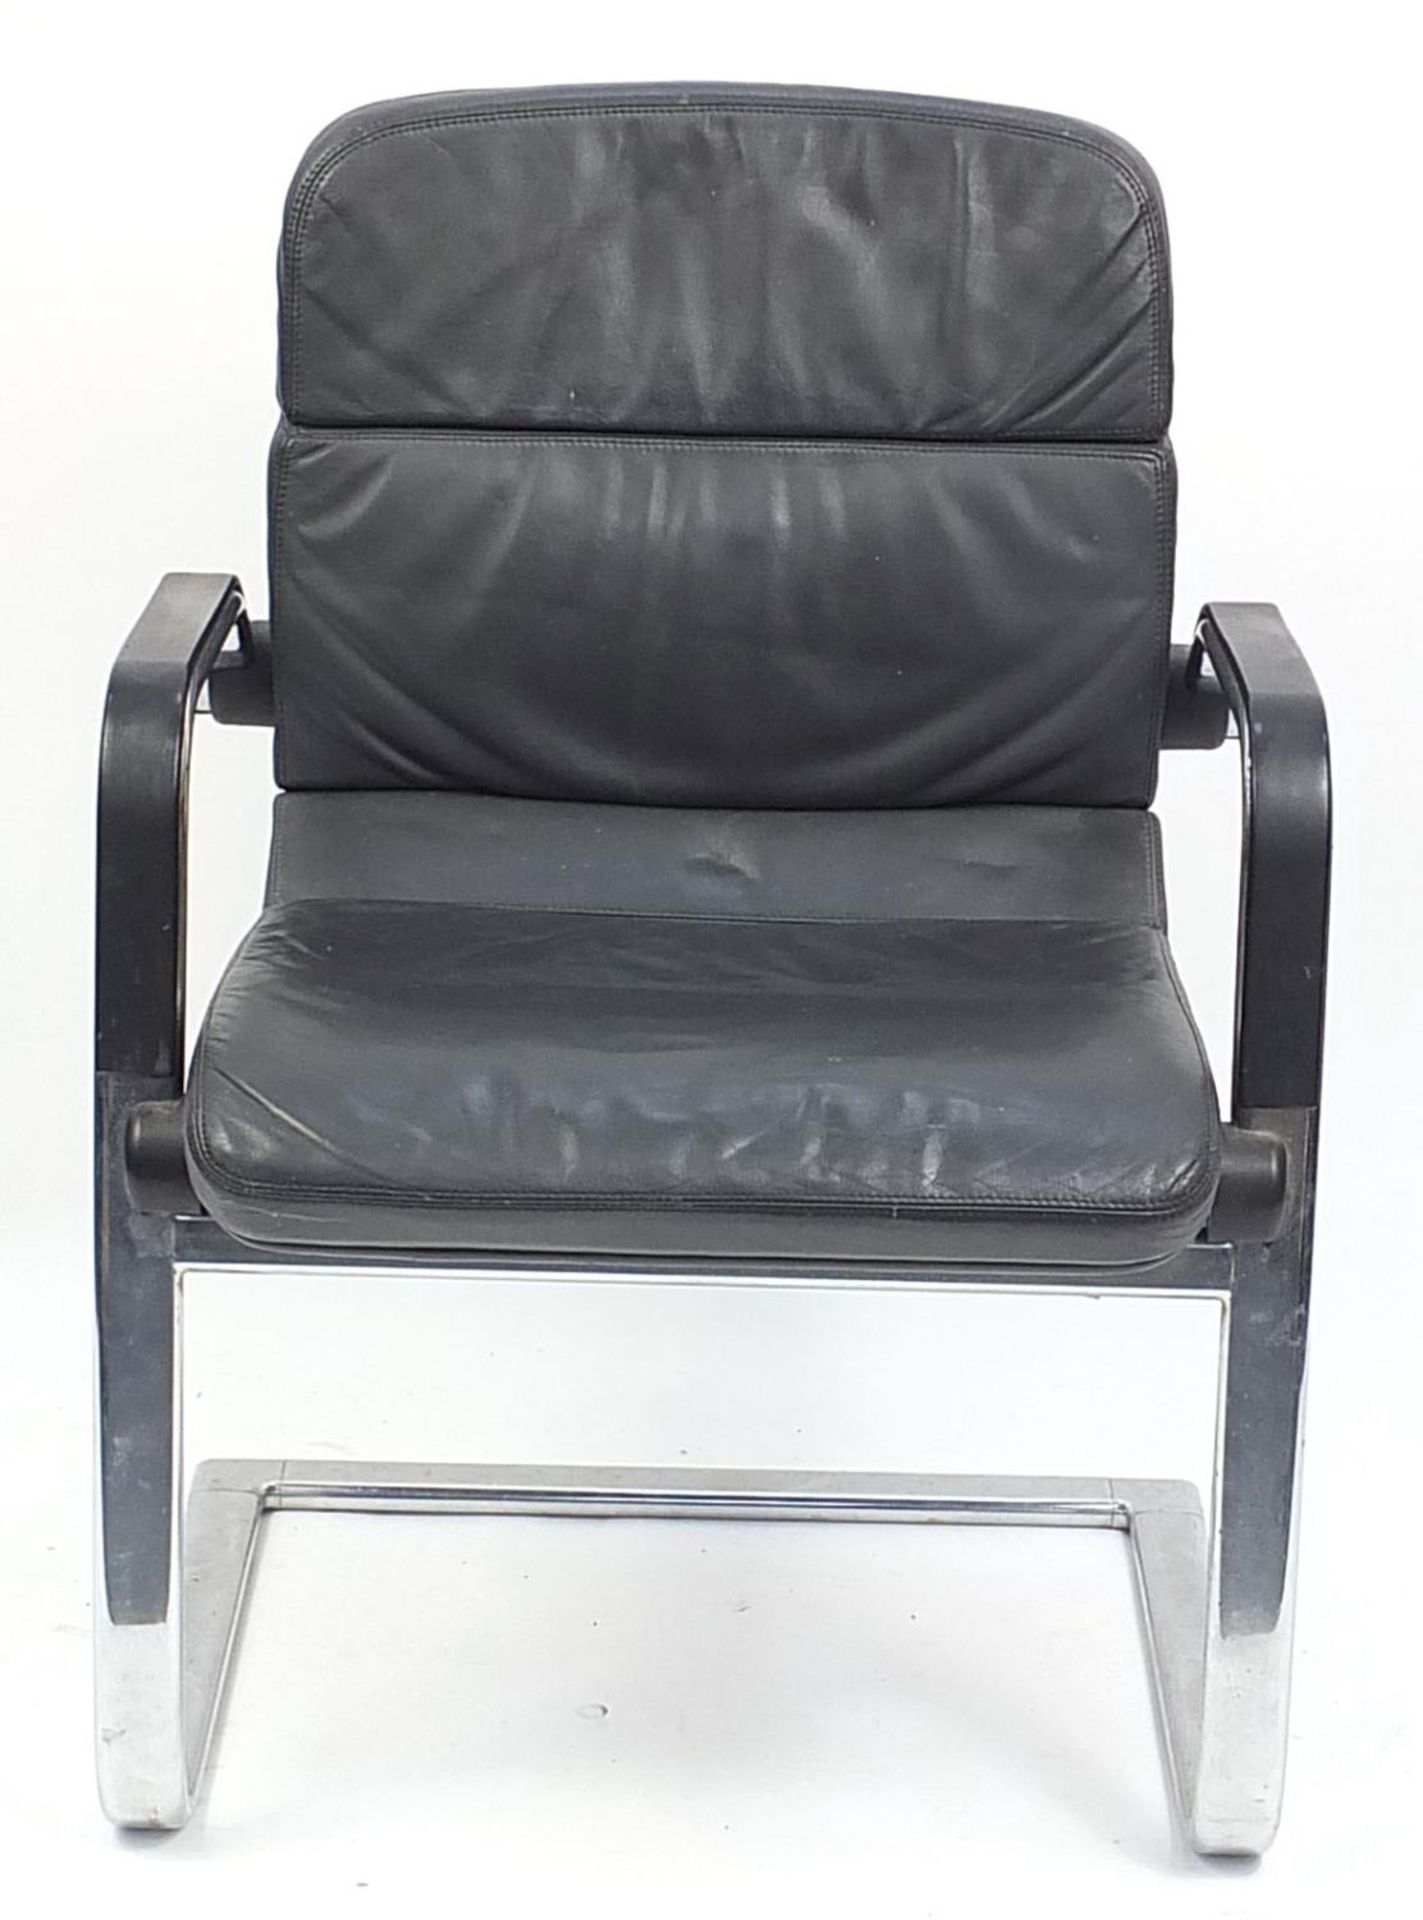 Ahren de Cirkel, Danish black leather and chrome recliner office chair, label to the base, - Image 2 of 4